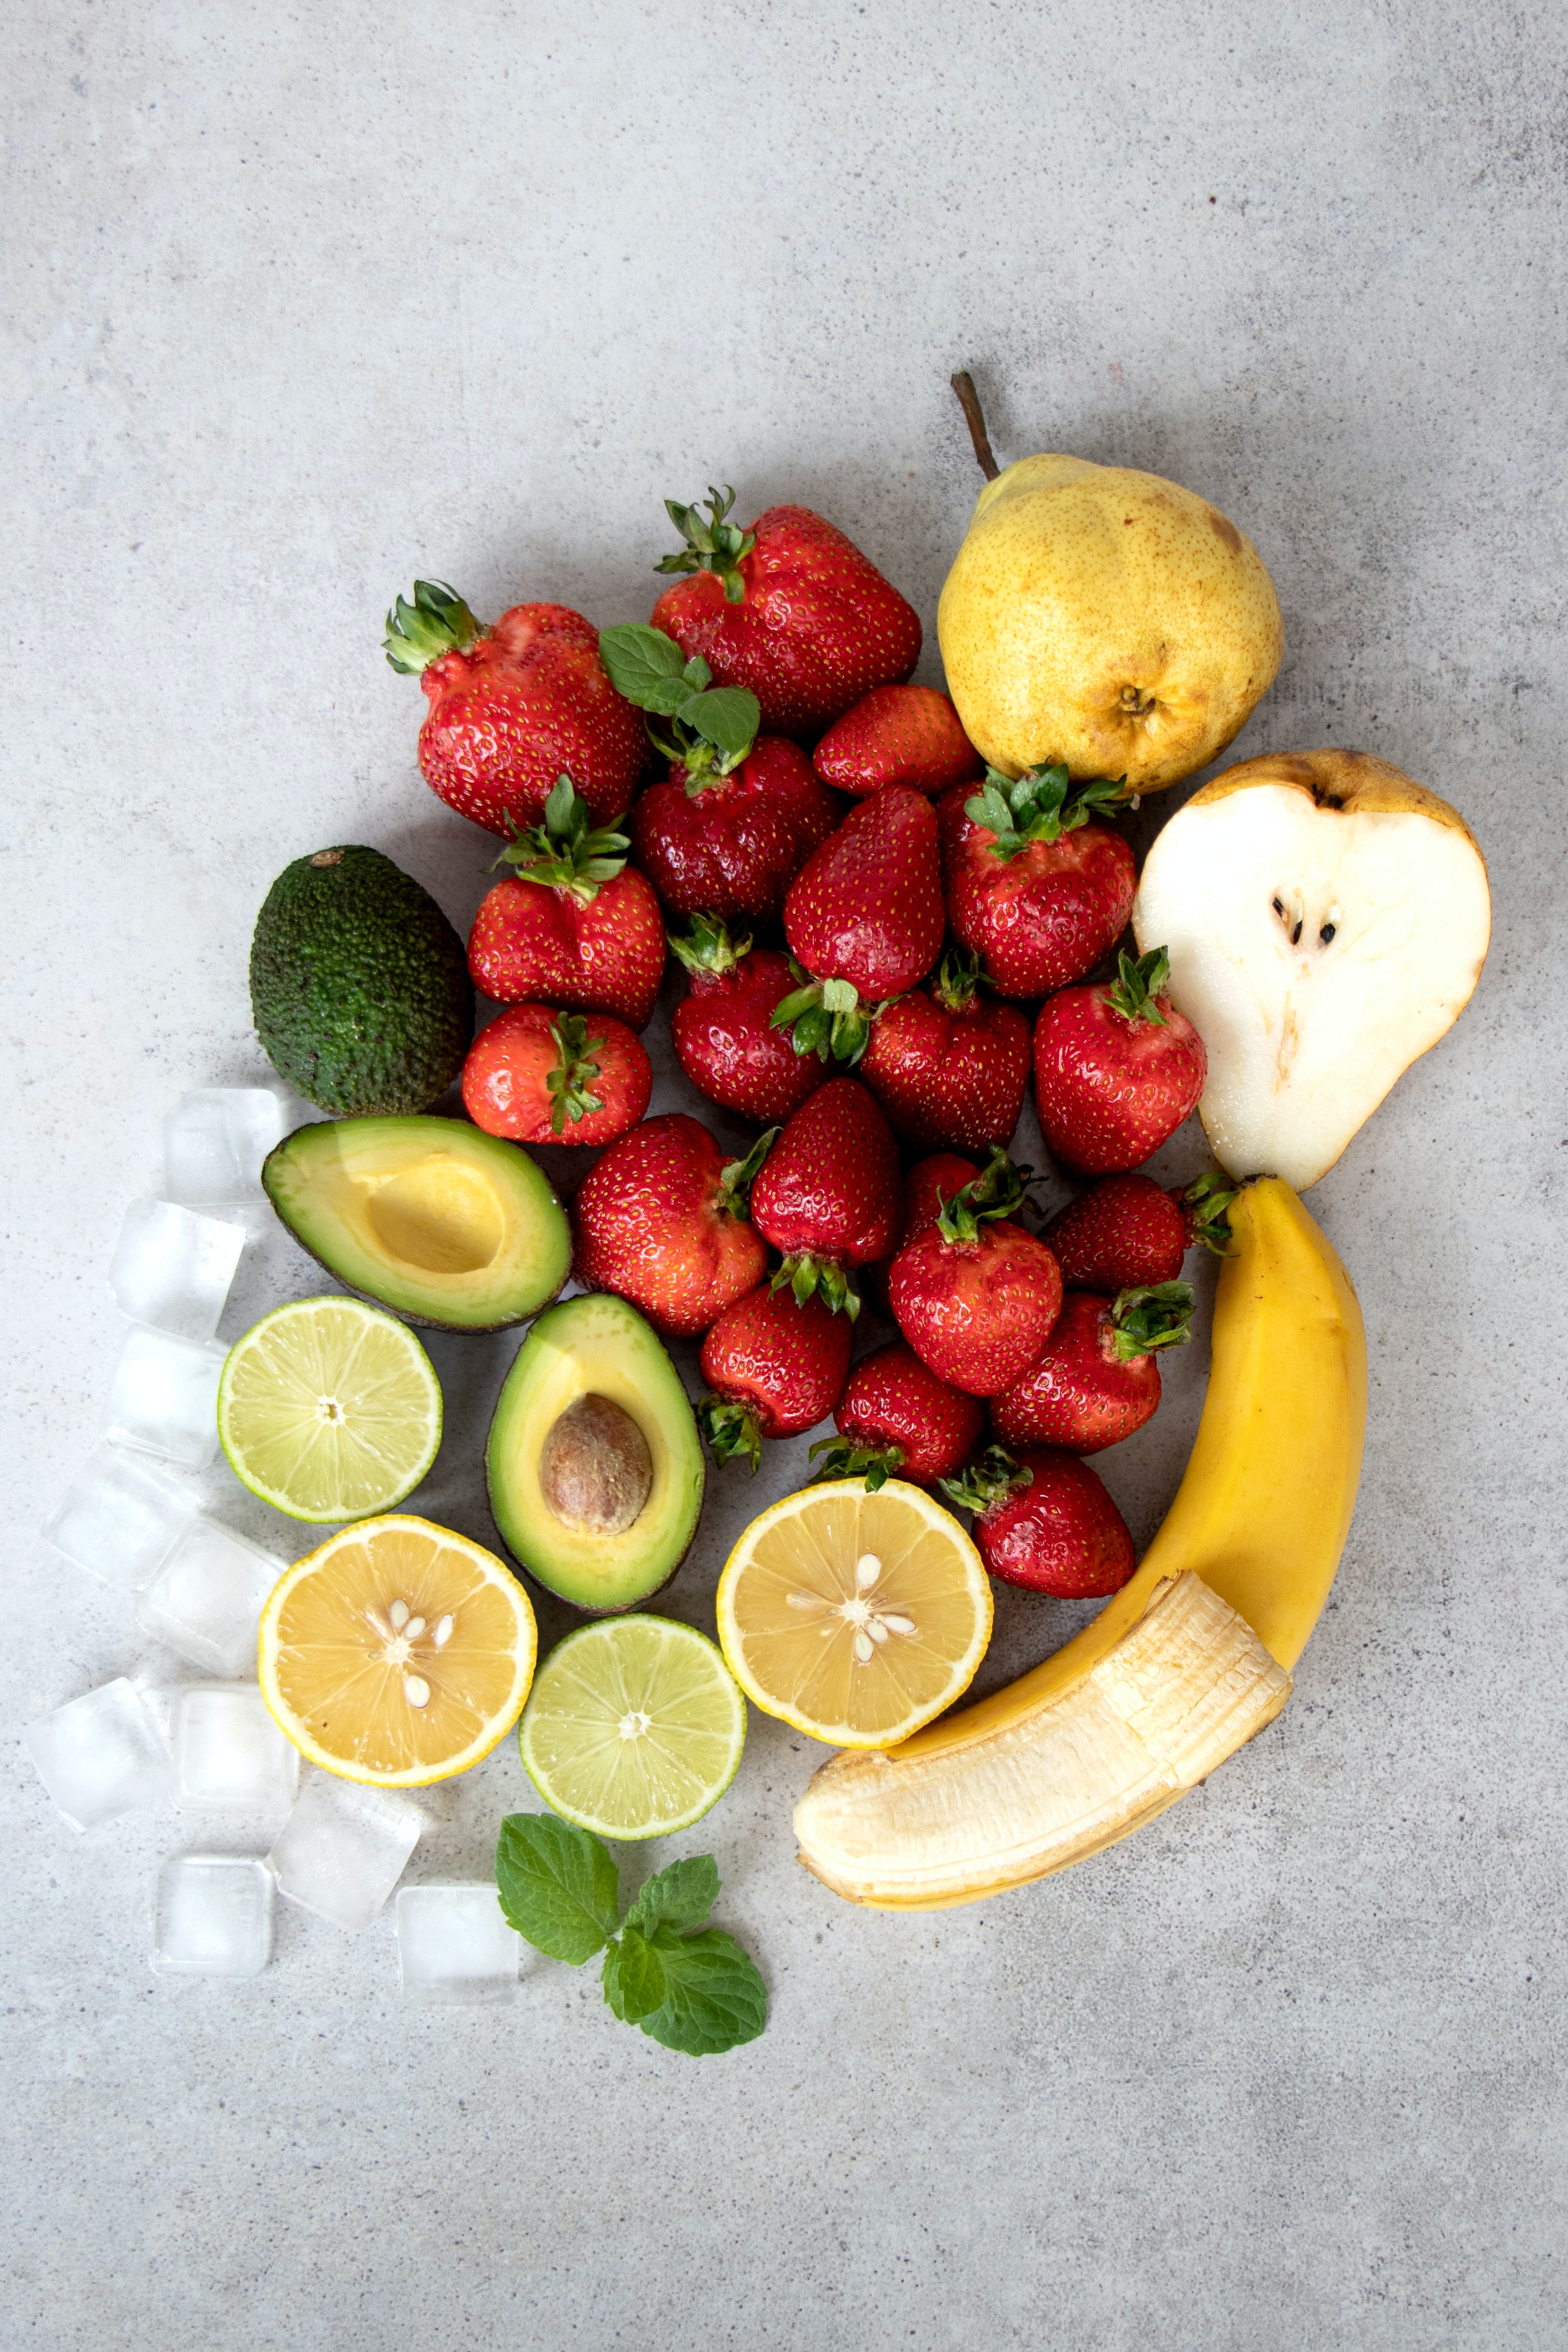 97066 download wallpaper lemon, fruits, food, strawberry, ice, avocado, banana, pear screensavers and pictures for free